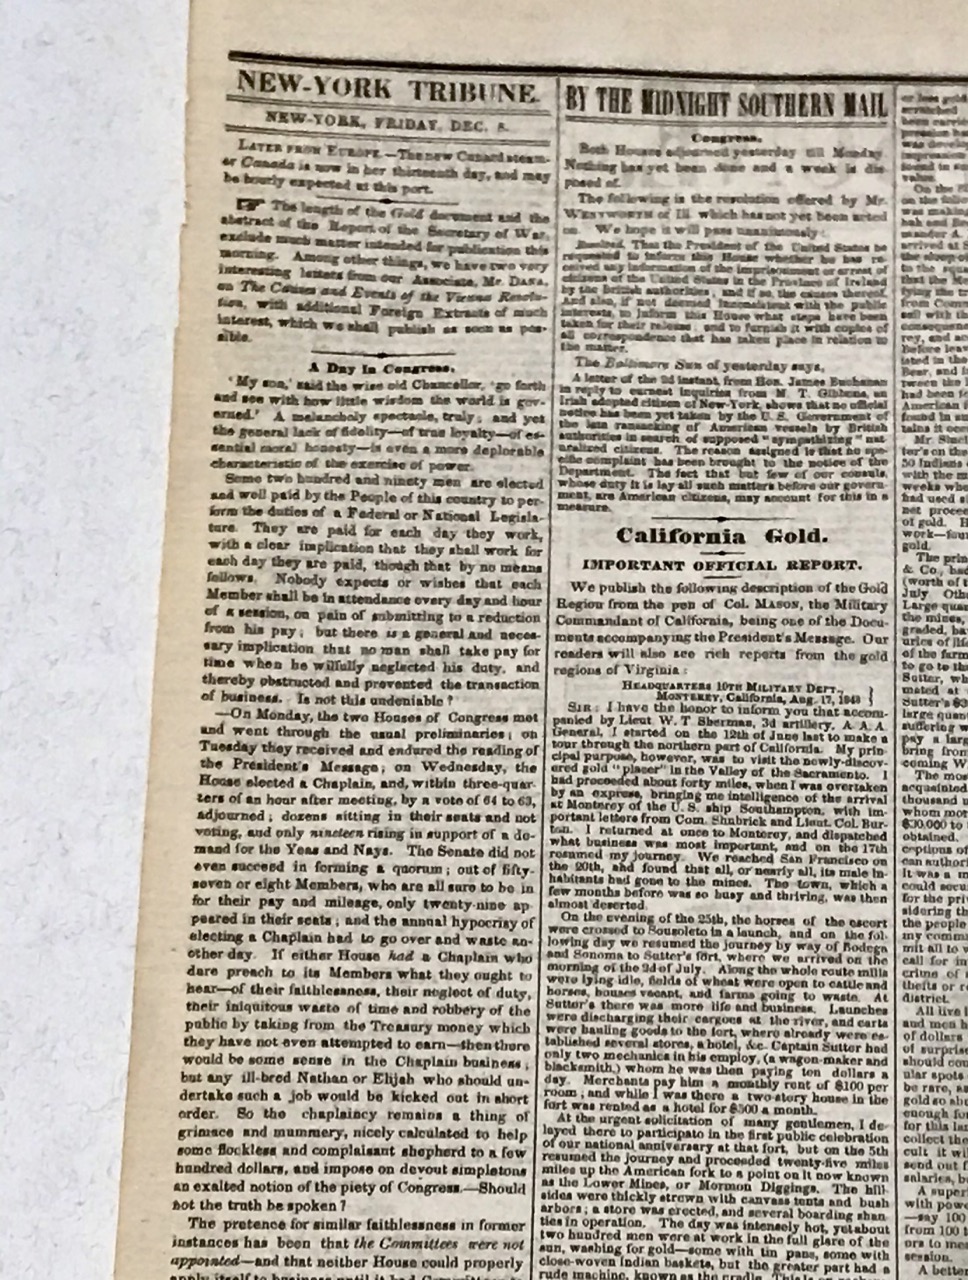 Image for “California Gold. Important Official Report.” In The New York Tribune for December 8, 1848